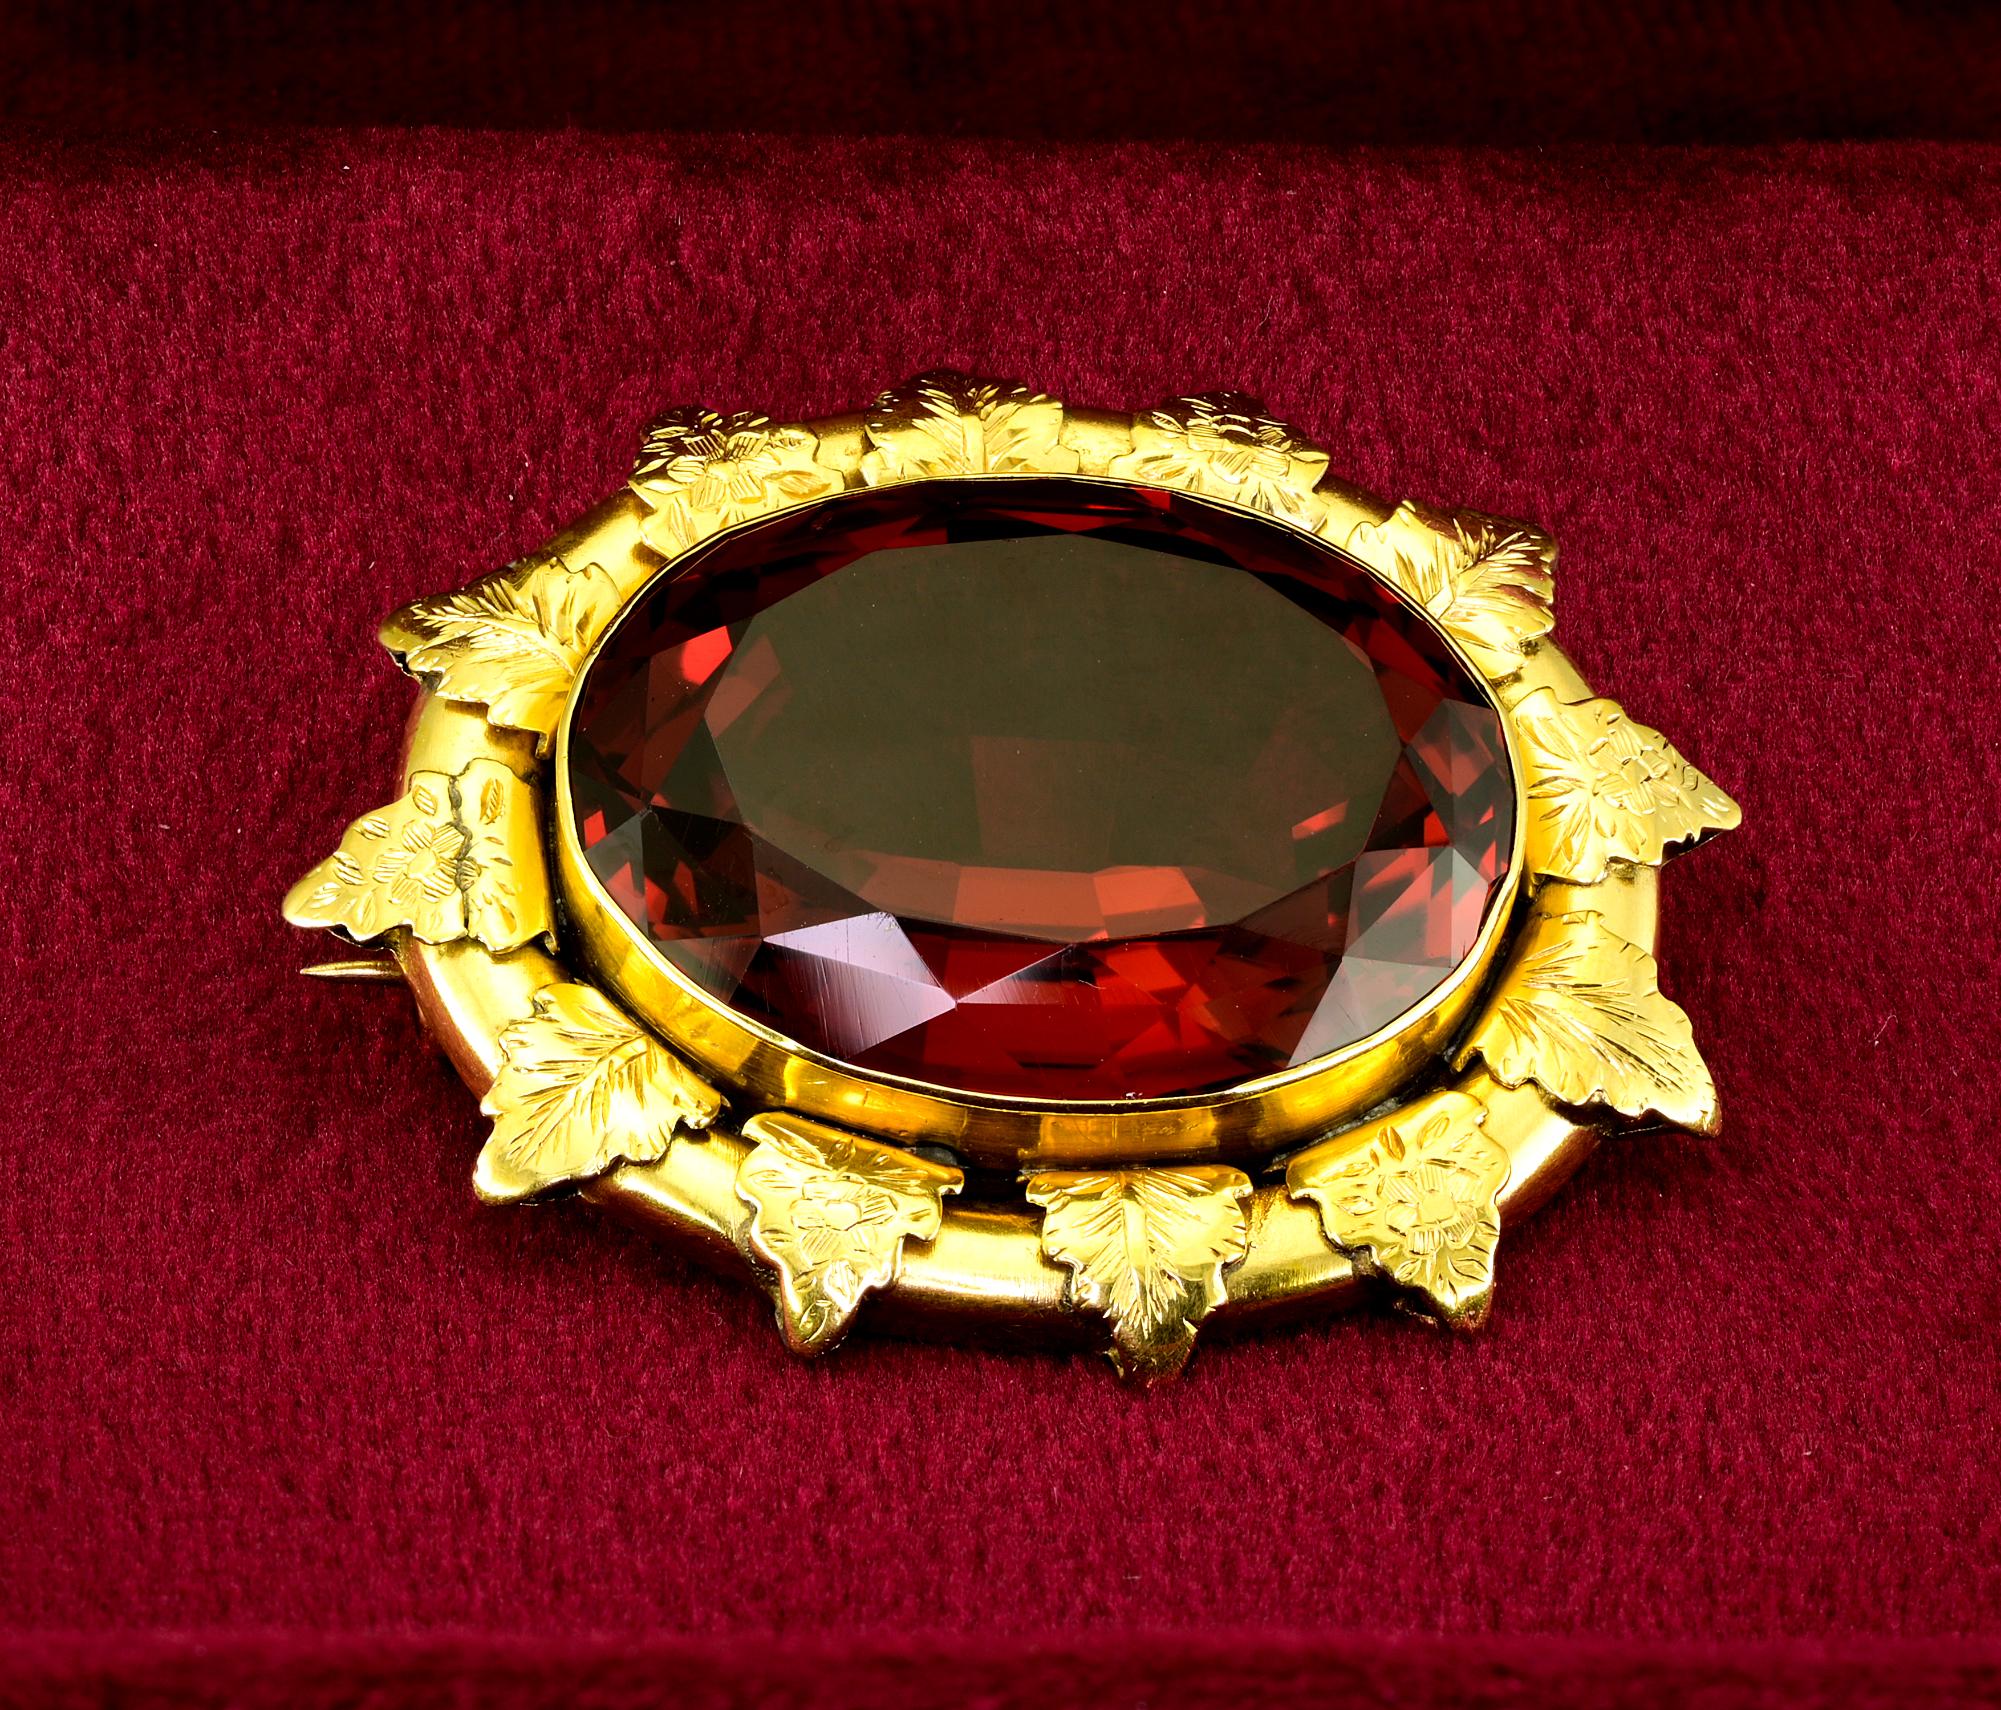 This beautiful Victorian period large brooch is 1880 ca
Skillfully hand crafted of solid 18 Kt gold
Marvelous leaf work around the frame detailed with carving
Centrally set with a stunning rich Red Orange intense and lively, rather rare color for